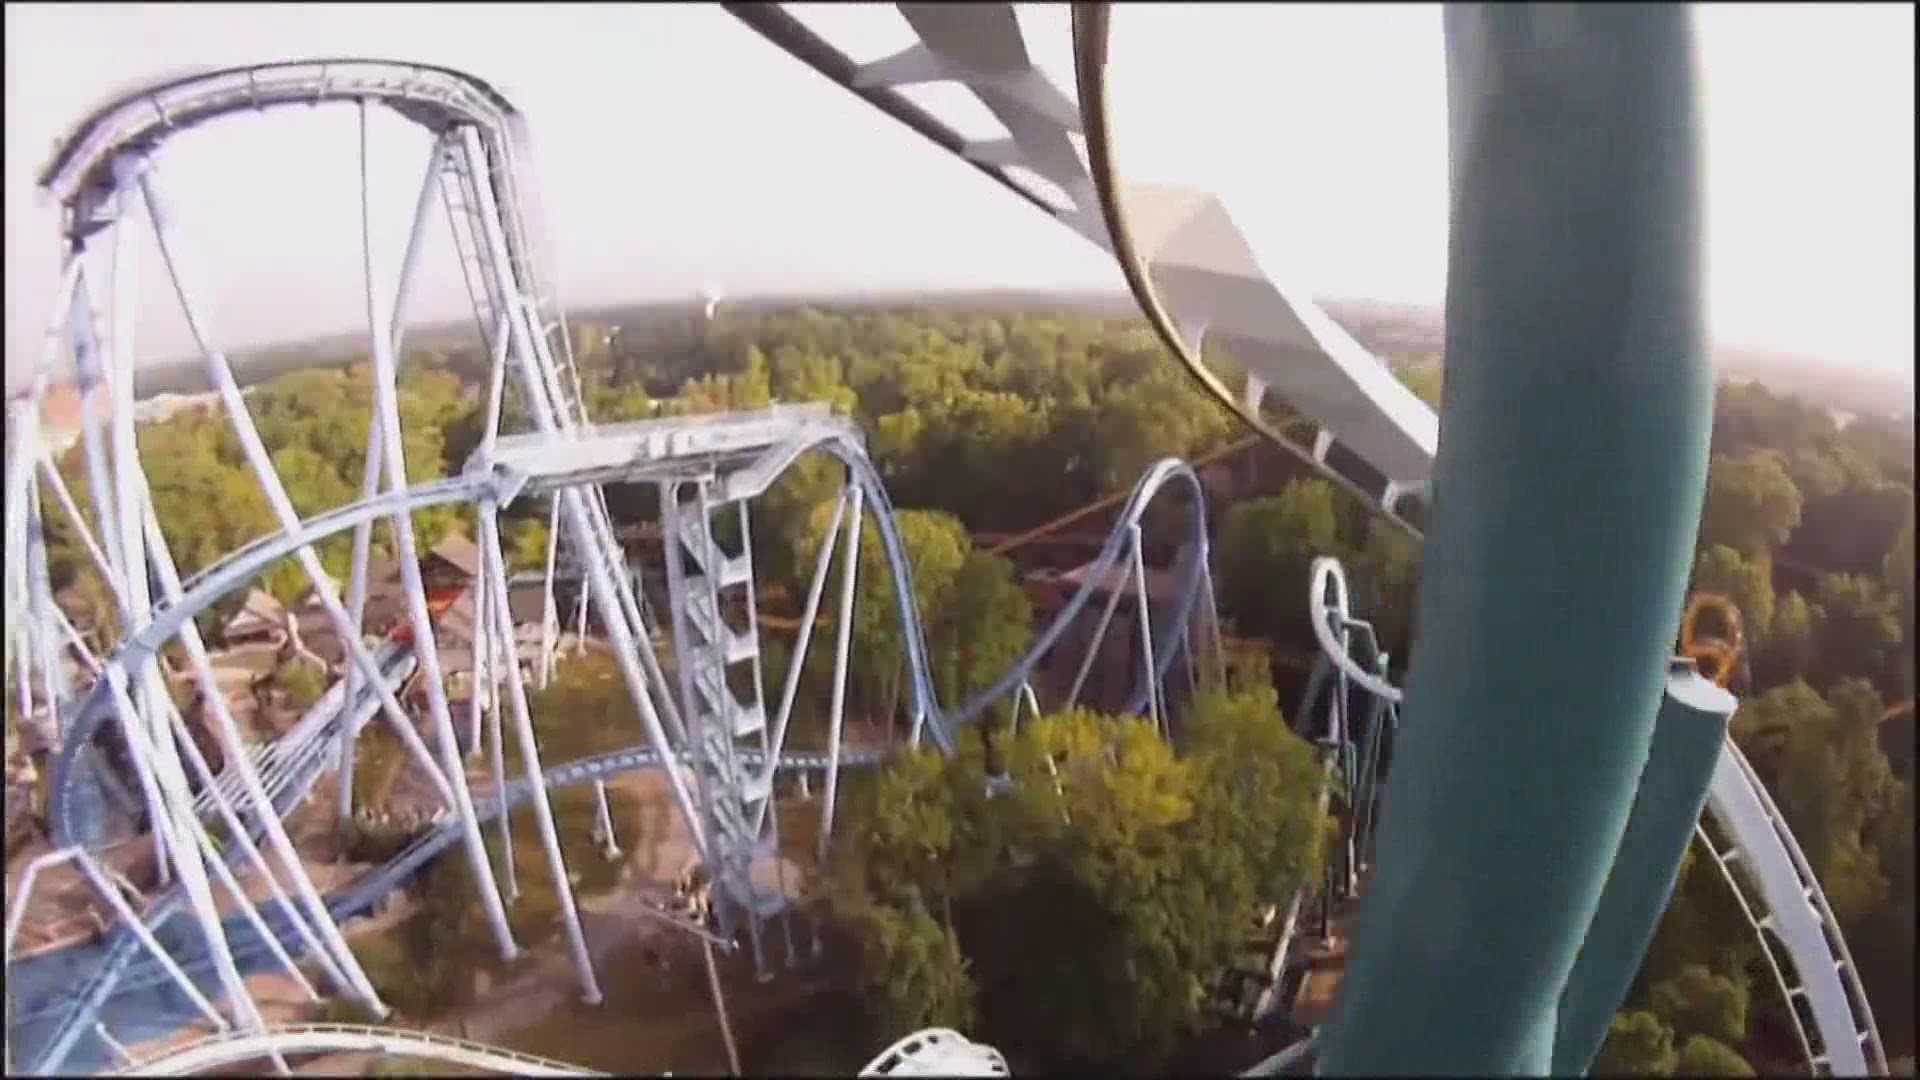 Busch Gardens Williamsburg Could Reopen In August Seaworld Says Khou Com